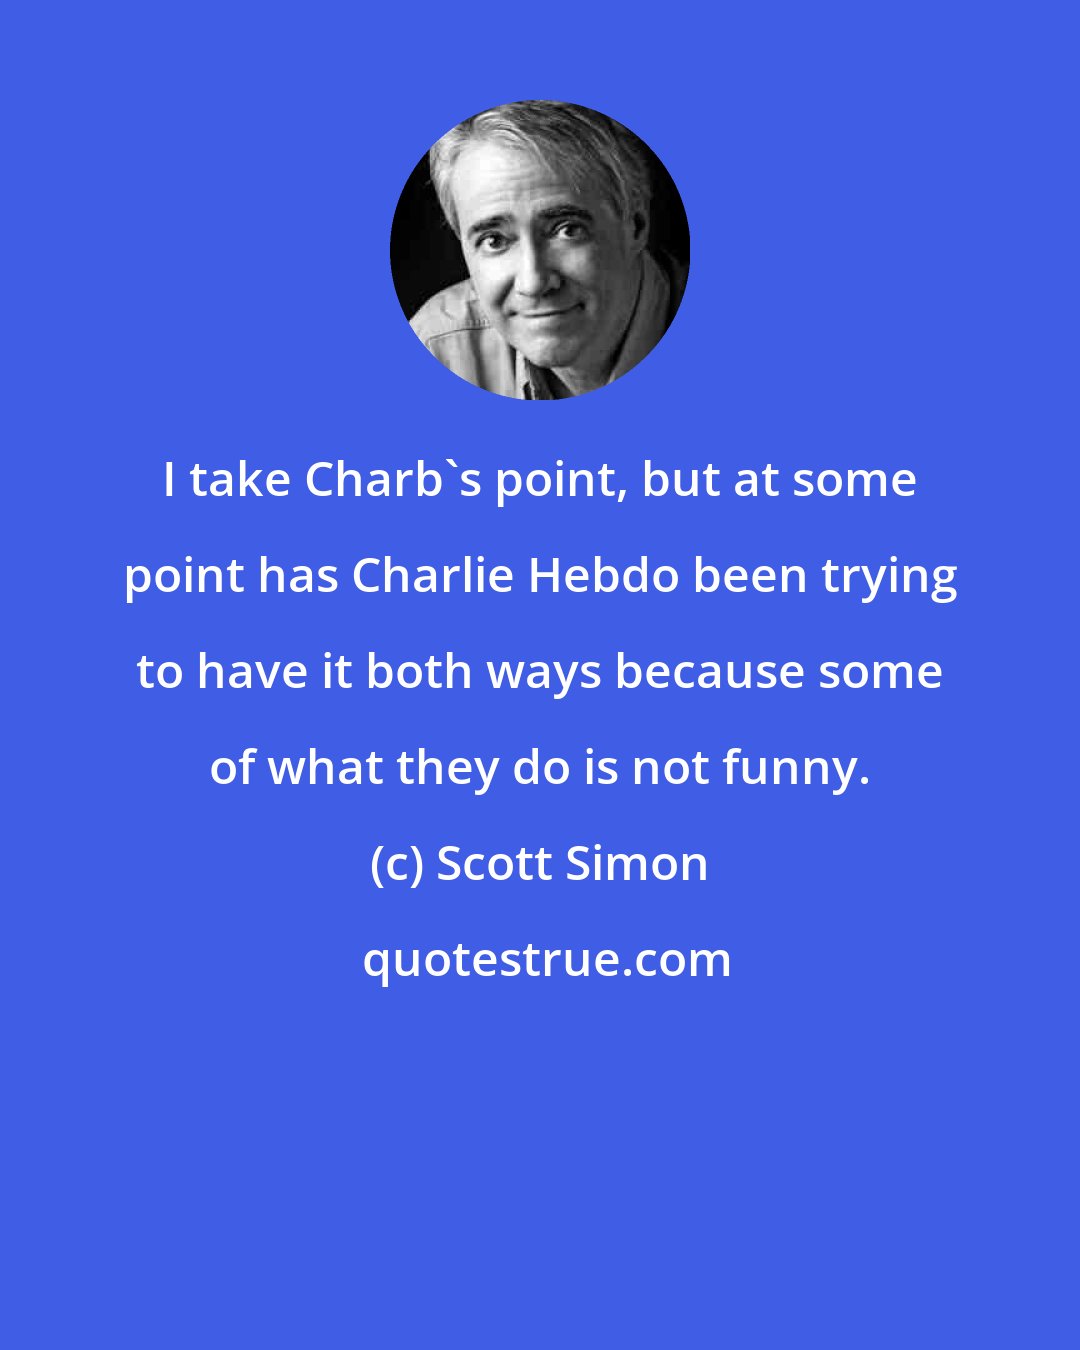 Scott Simon: I take Charb's point, but at some point has Charlie Hebdo been trying to have it both ways because some of what they do is not funny.